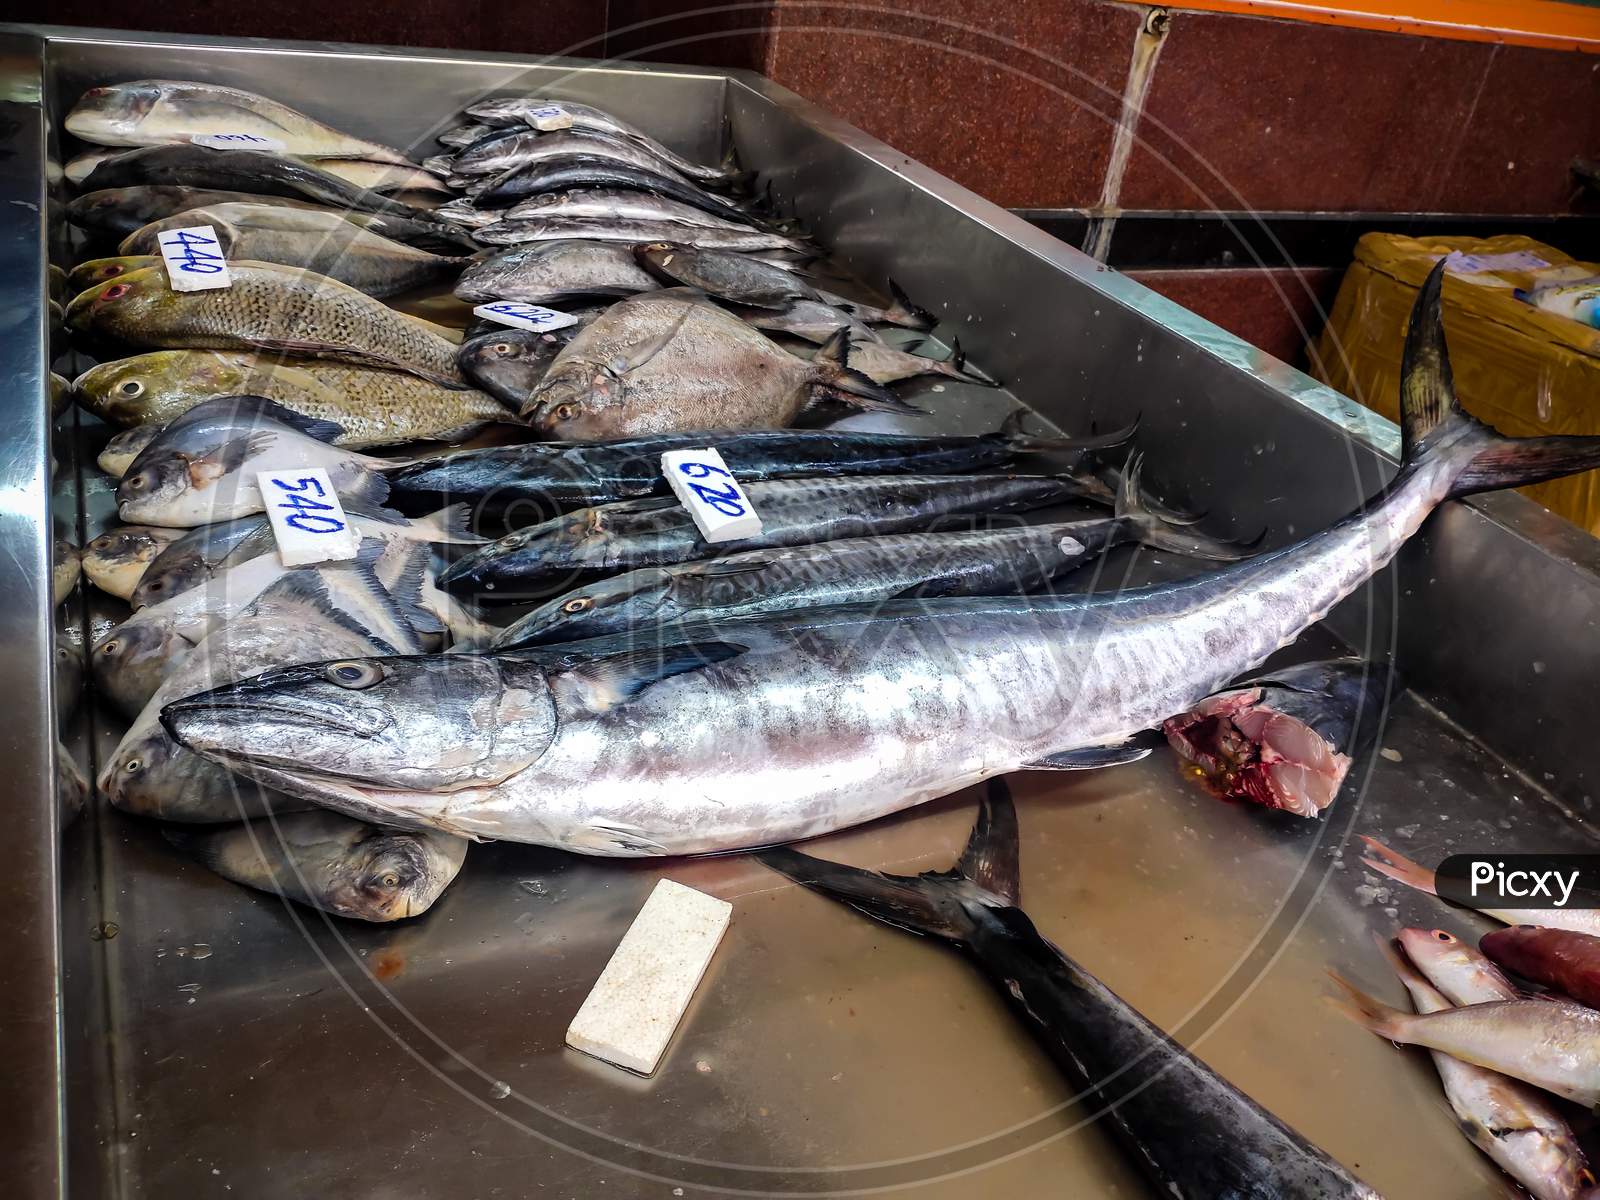 Seafood Market - Fresh Sea Fishes On Fish Market With Mentioned Rate Per Kg. Spanish Mackerels